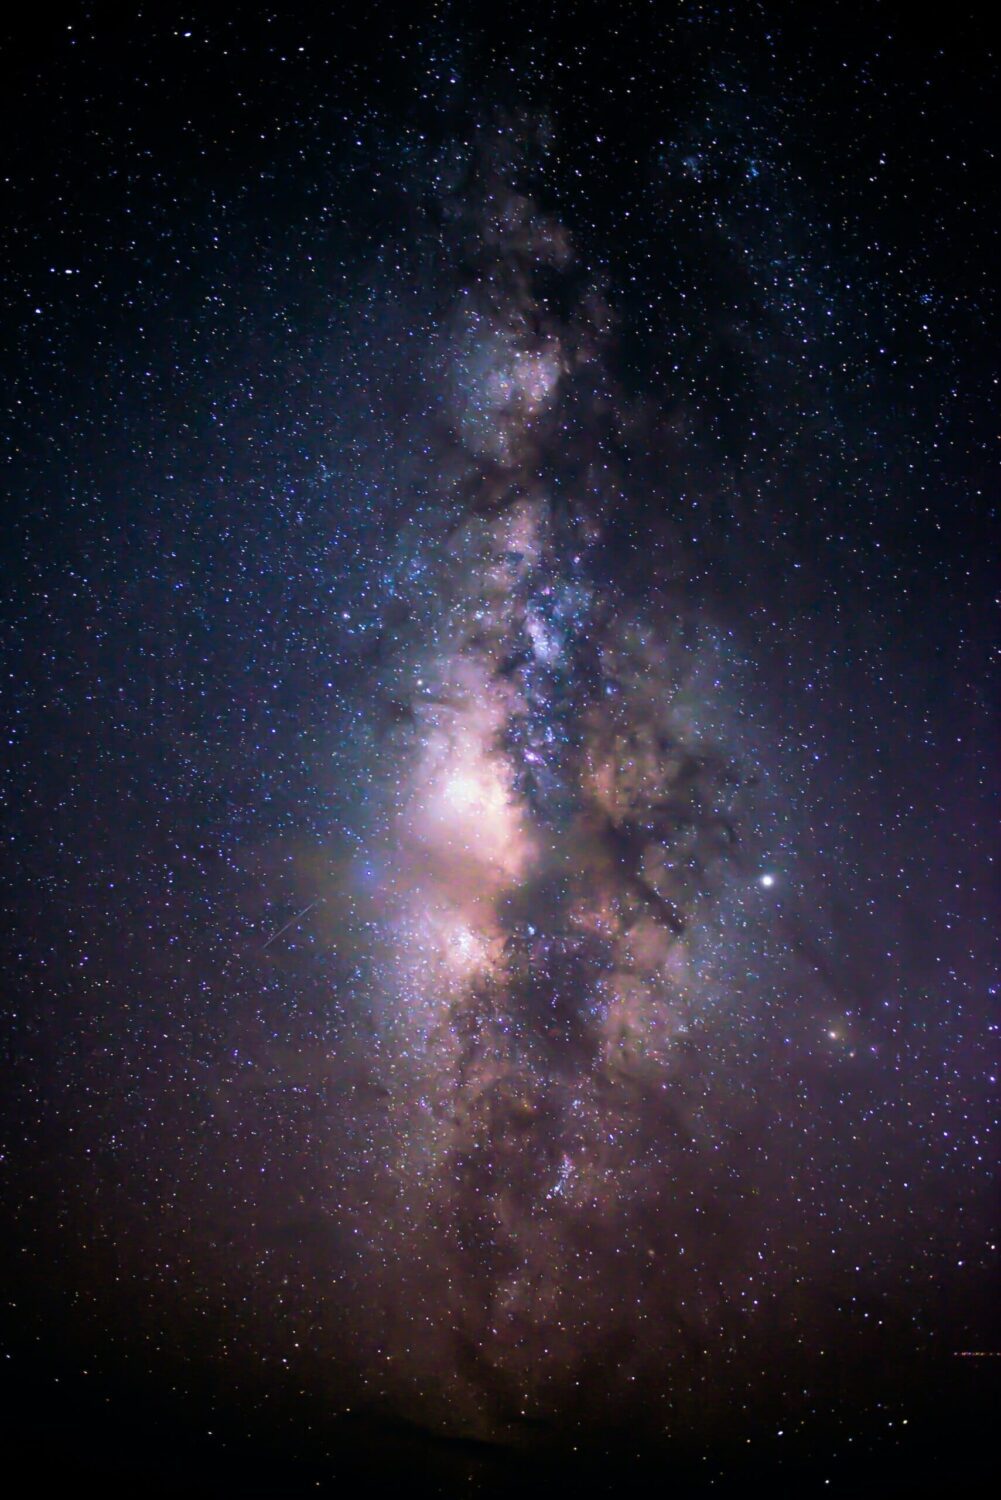 A colorful milkyway with stars in a celestial constillation